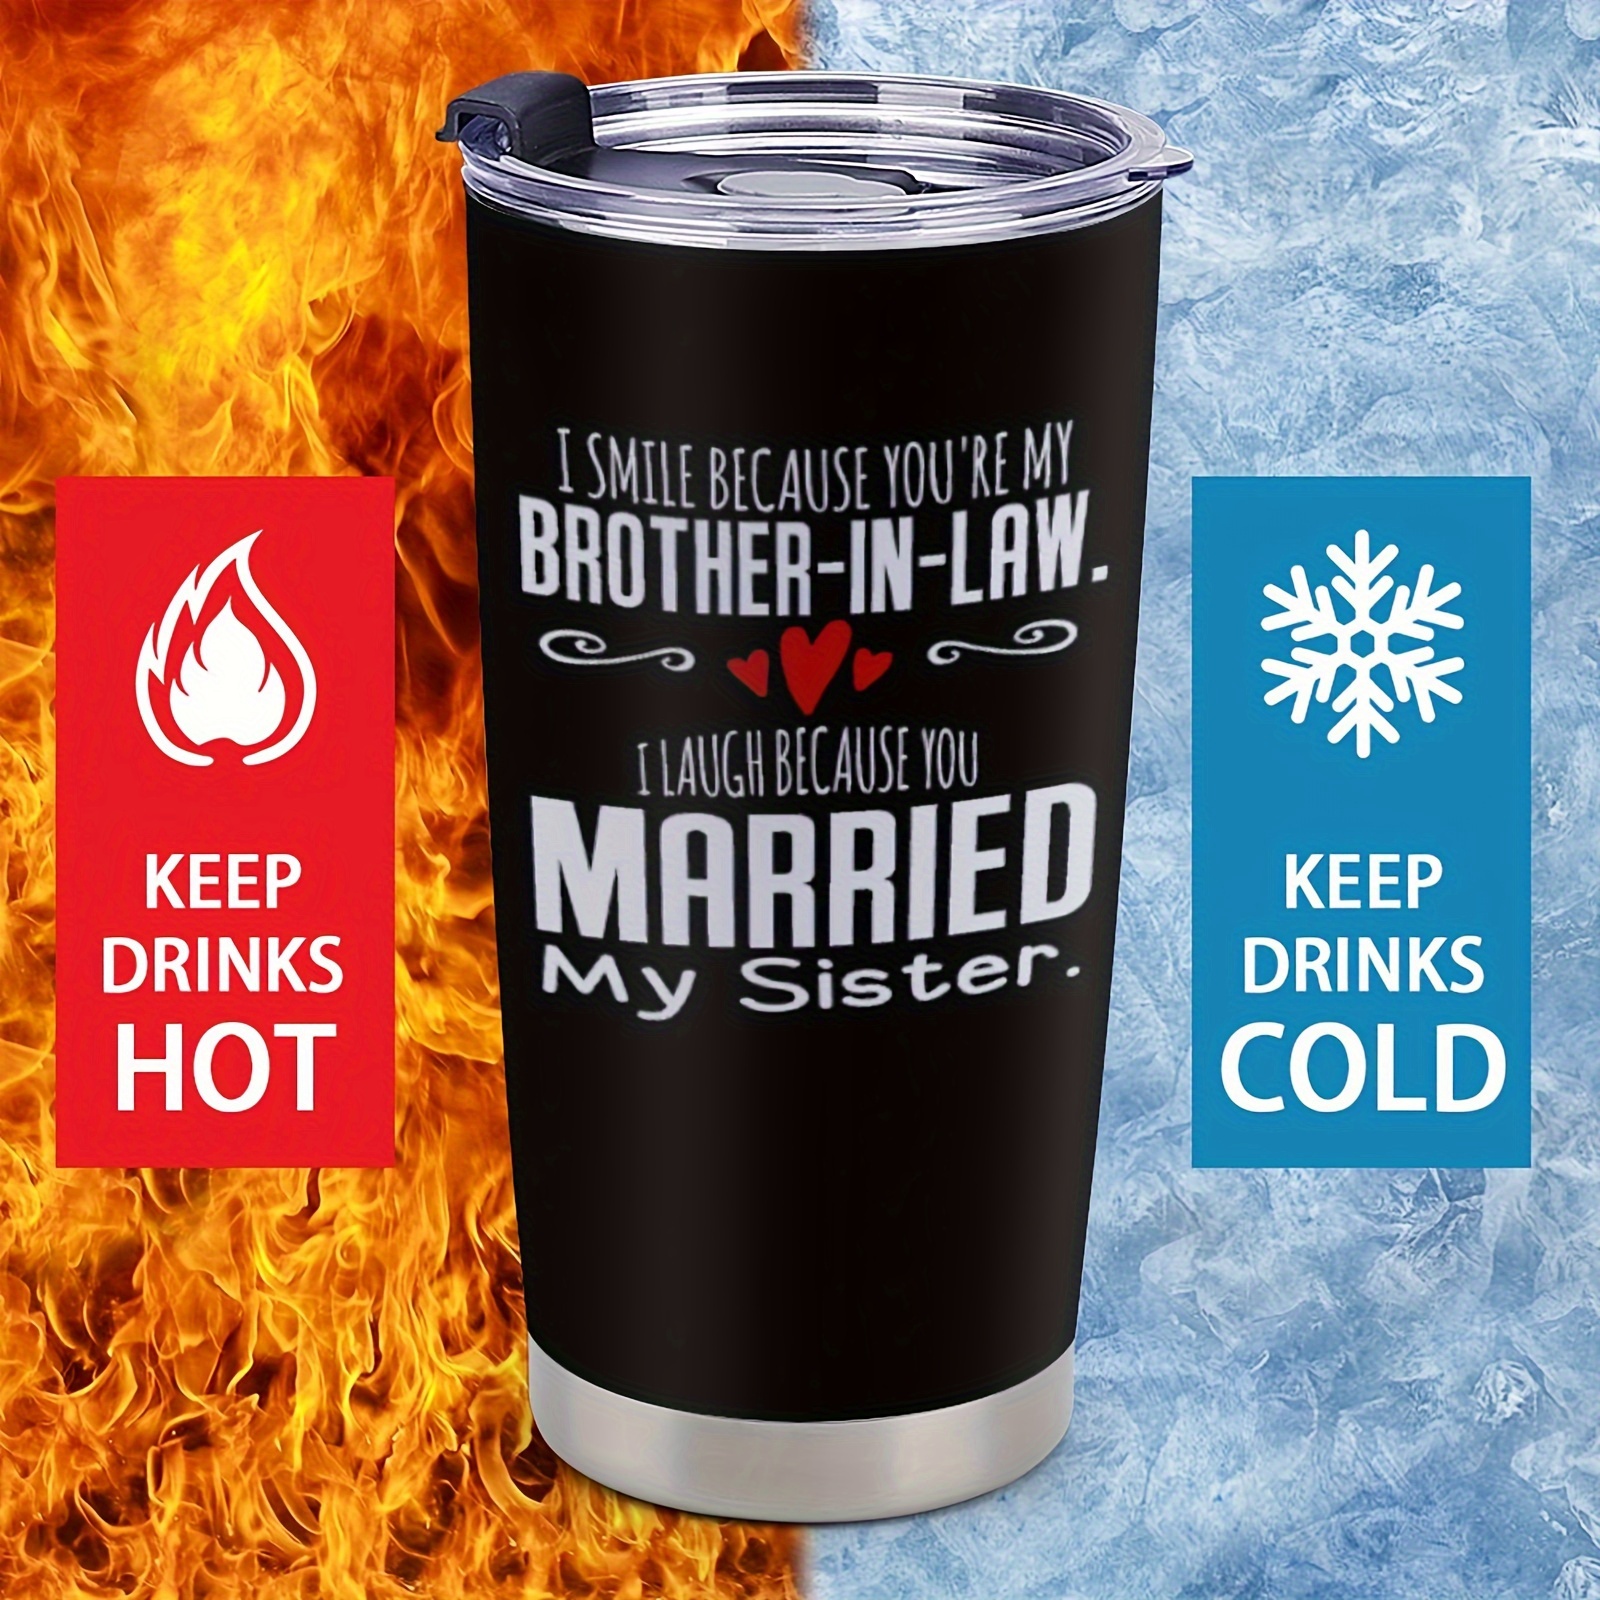 

I Smile Because You Are My Brother-in-law I Laugh Because You Married My Sister A 20 Ounce Tumbler With A Lid And Straw, Fun Letter Cup, Gift For Siblings, Friends, And Family, Black Cup